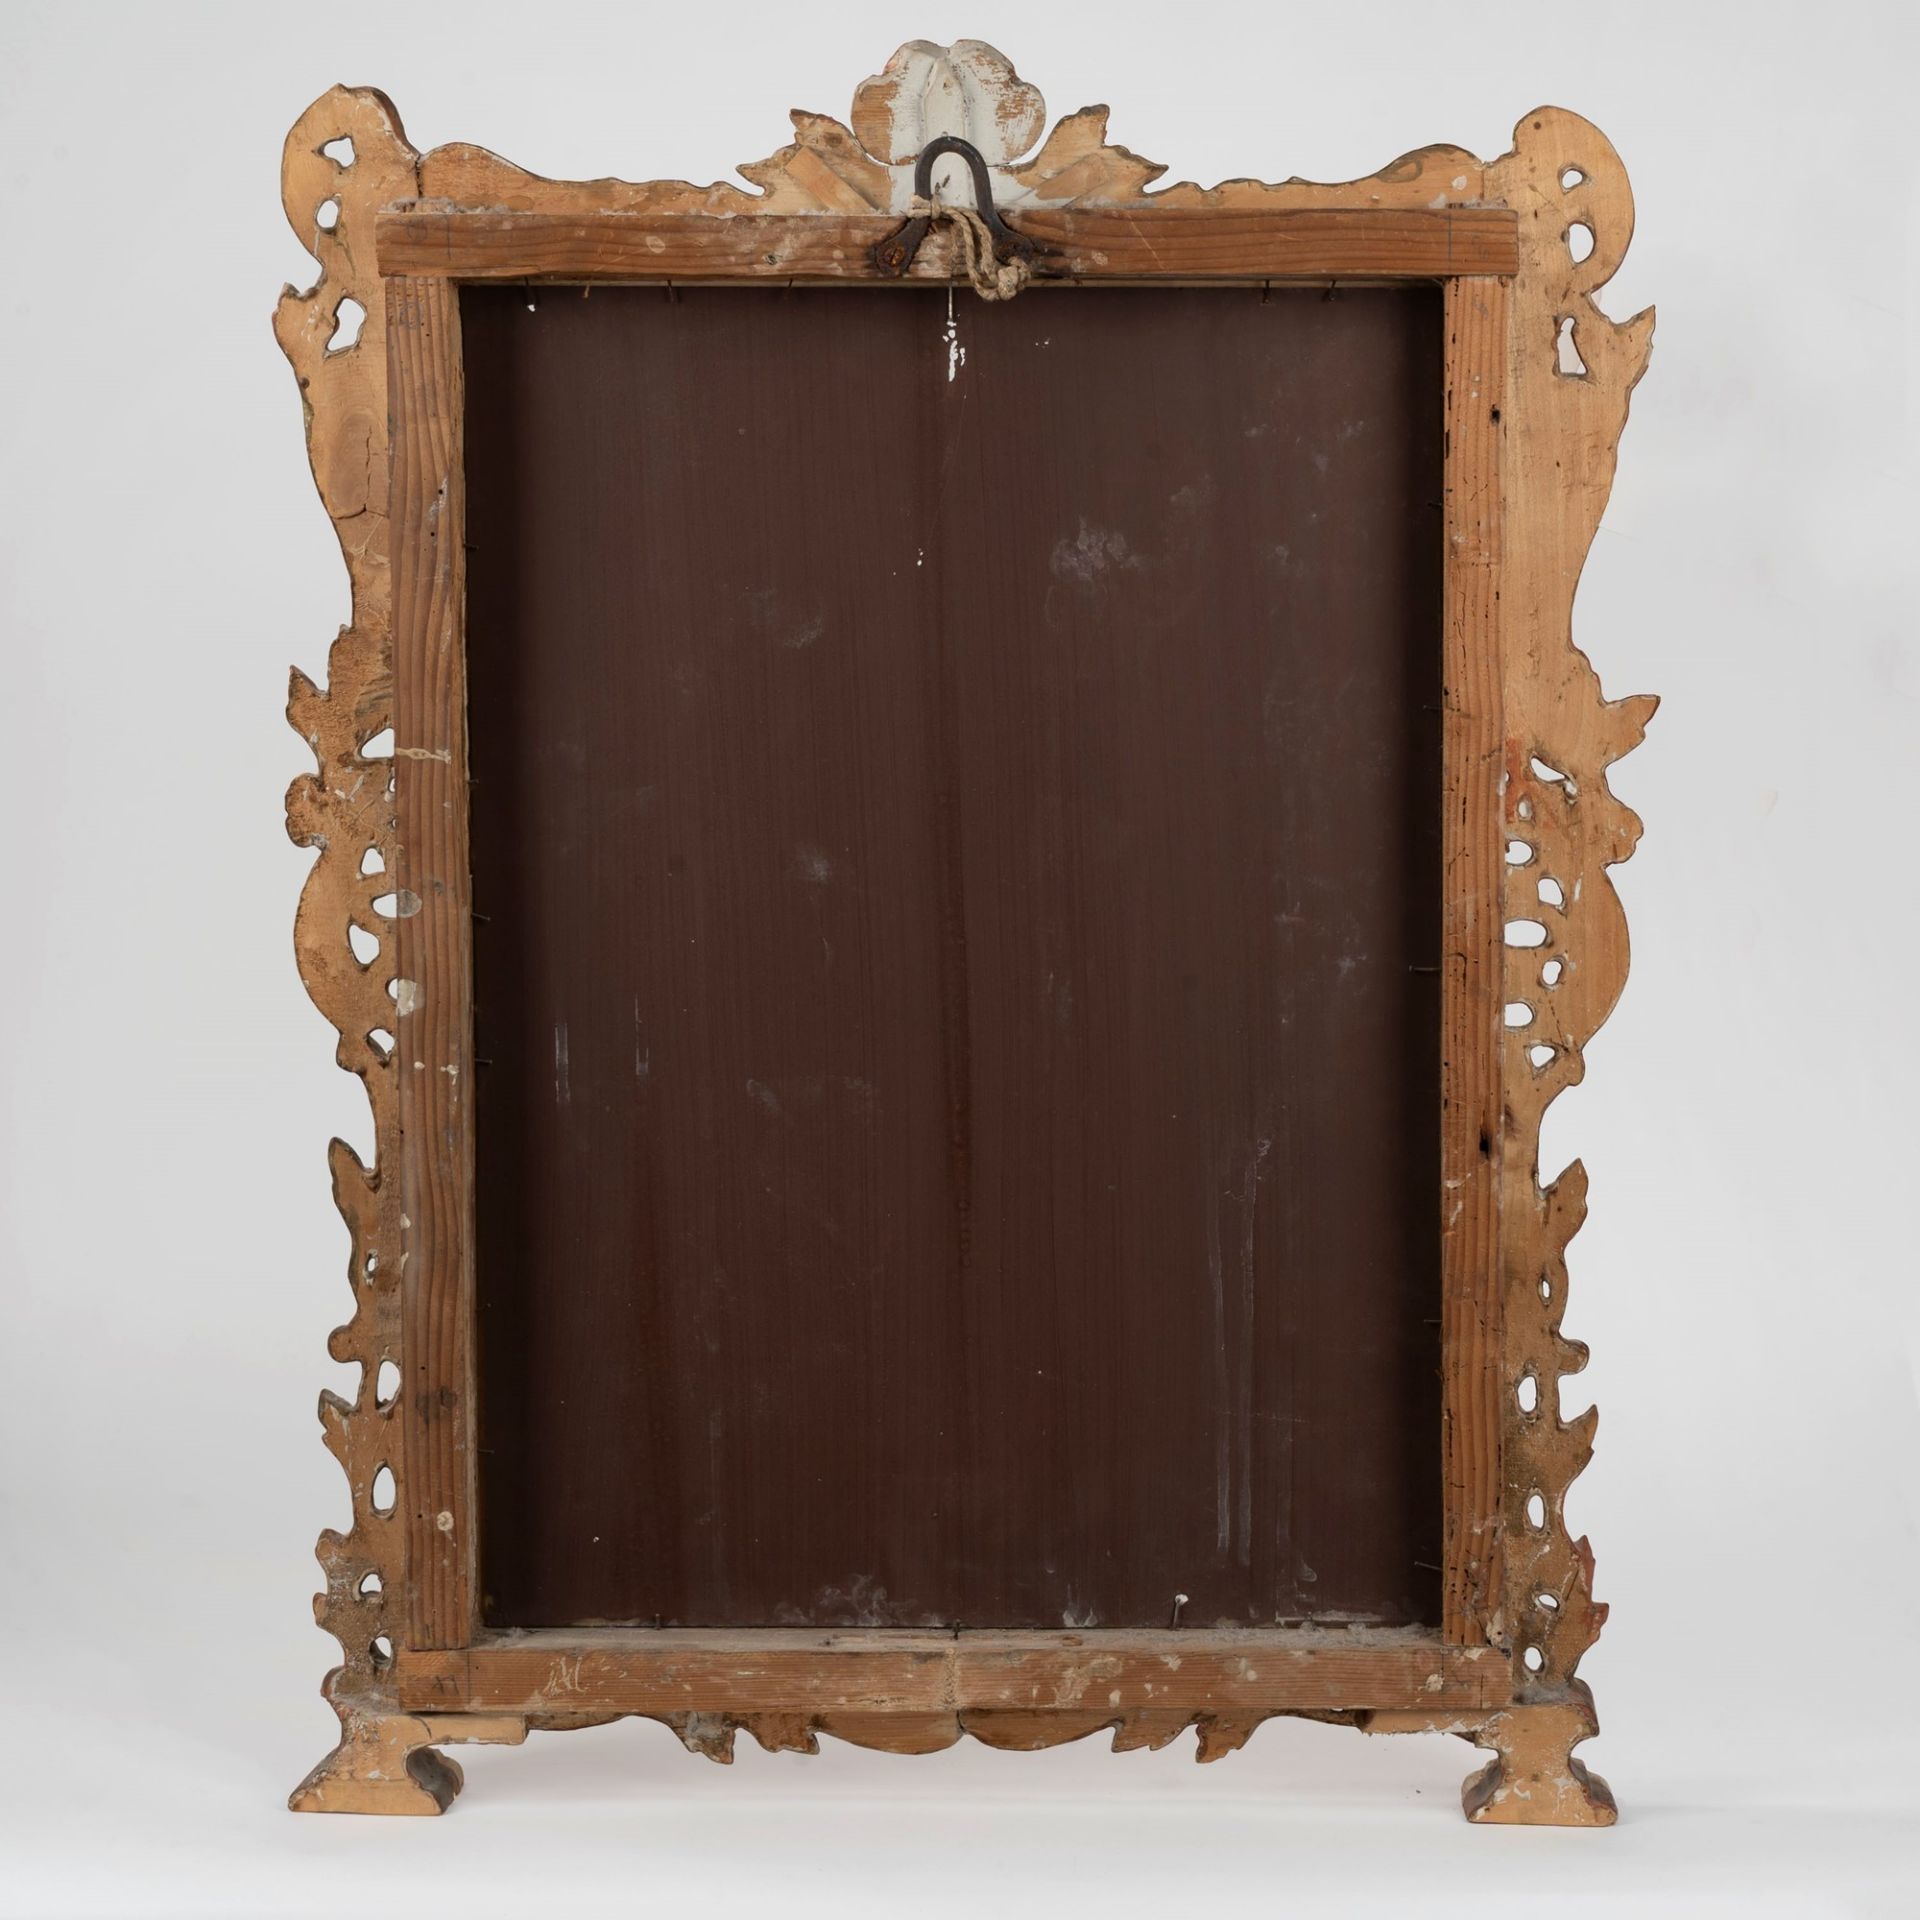 Carved and gilded wooden mirror, 20th century - Image 2 of 2